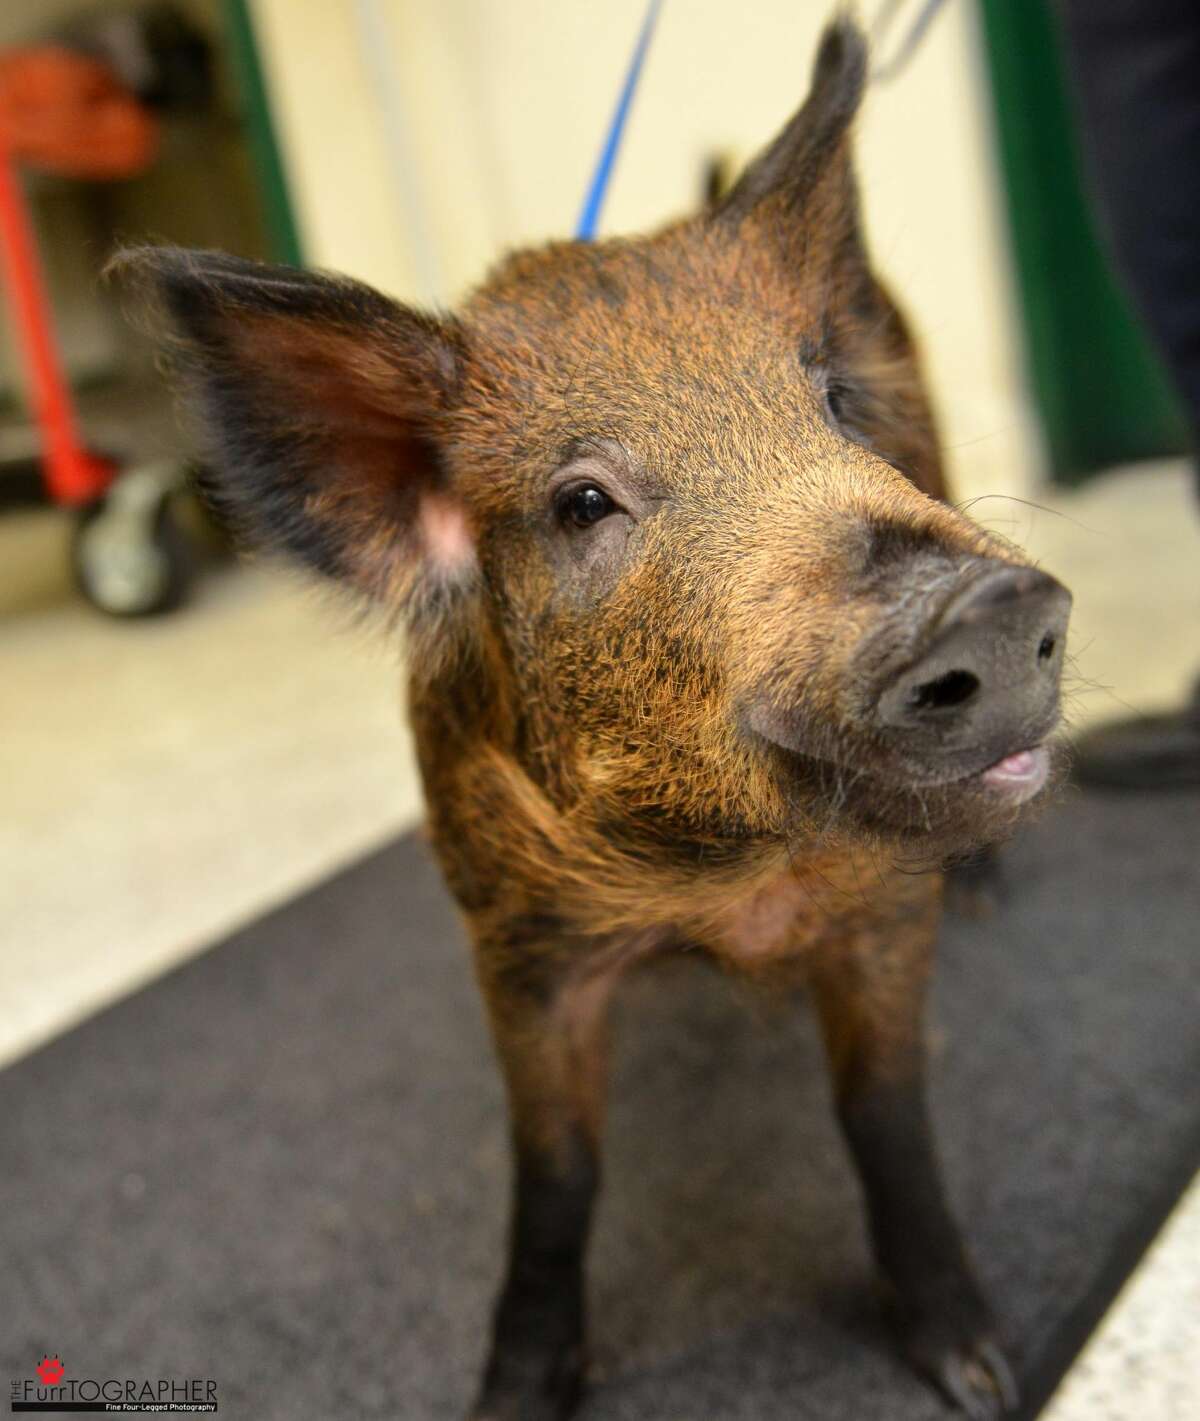 Update: Wild boar kept as SF house pet finds new, more suitable home